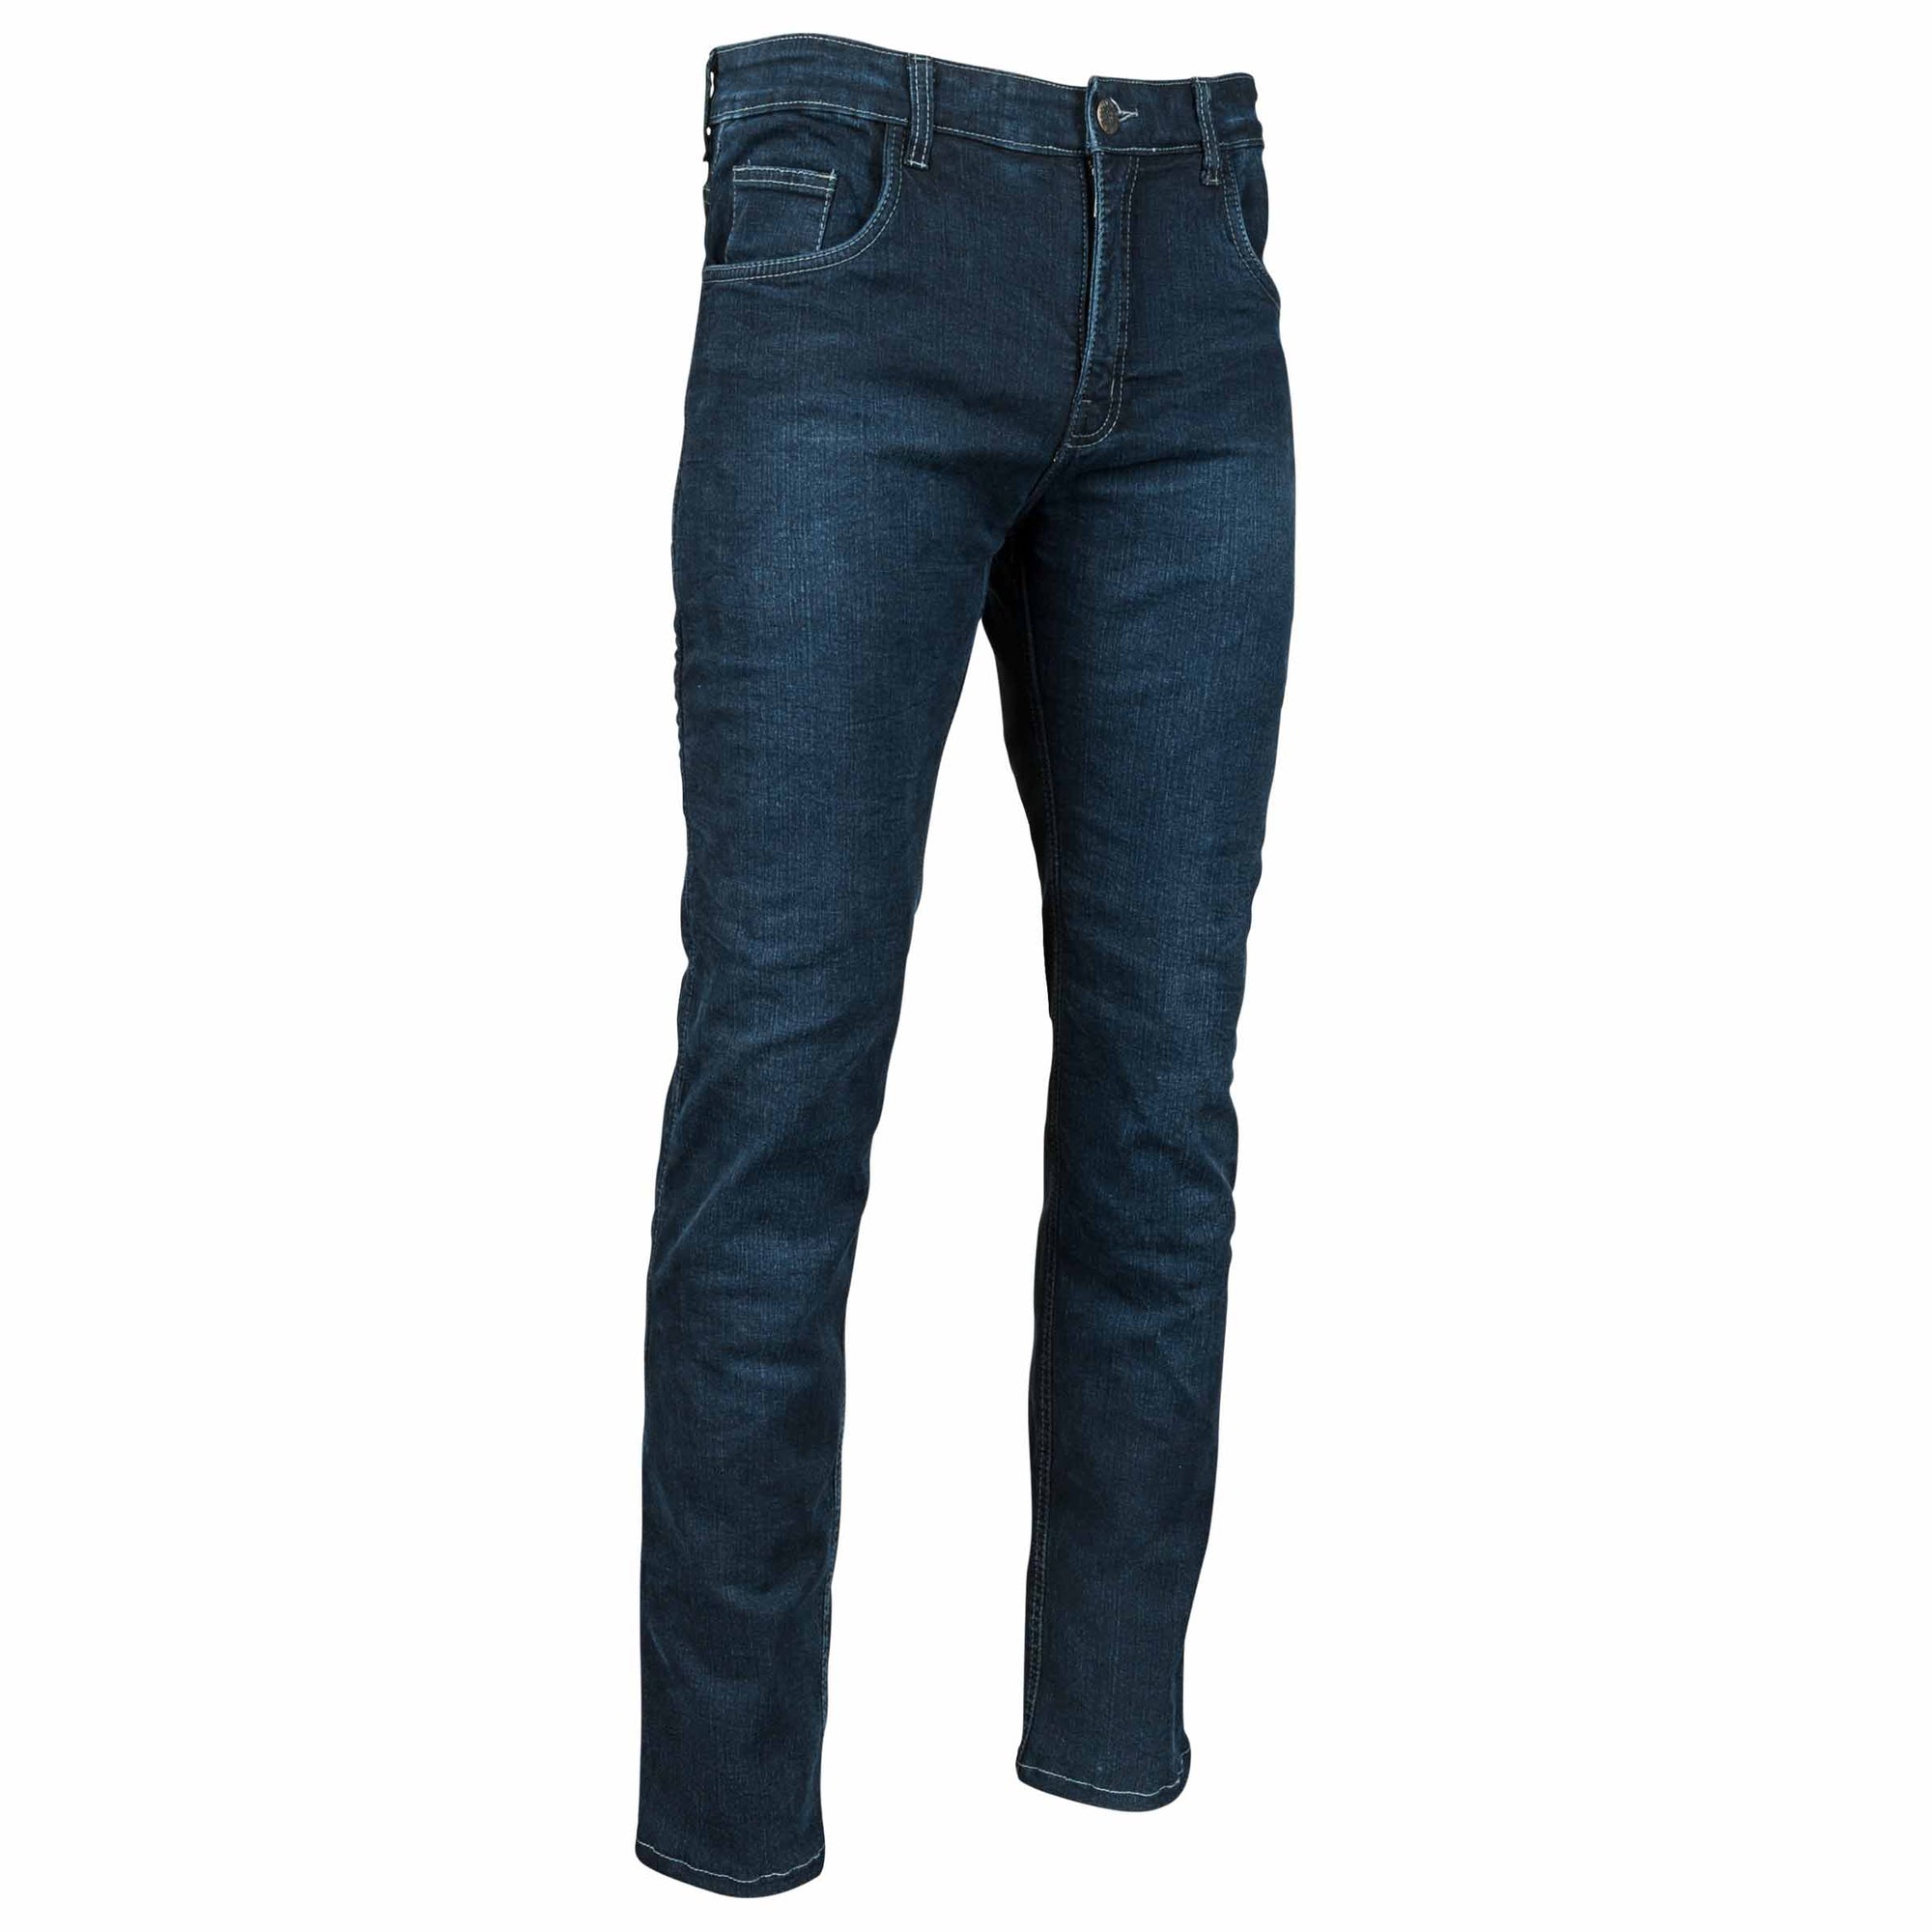 Joe Rocket Canada Highside Reinforced and Armoured Motorcycle Jeans